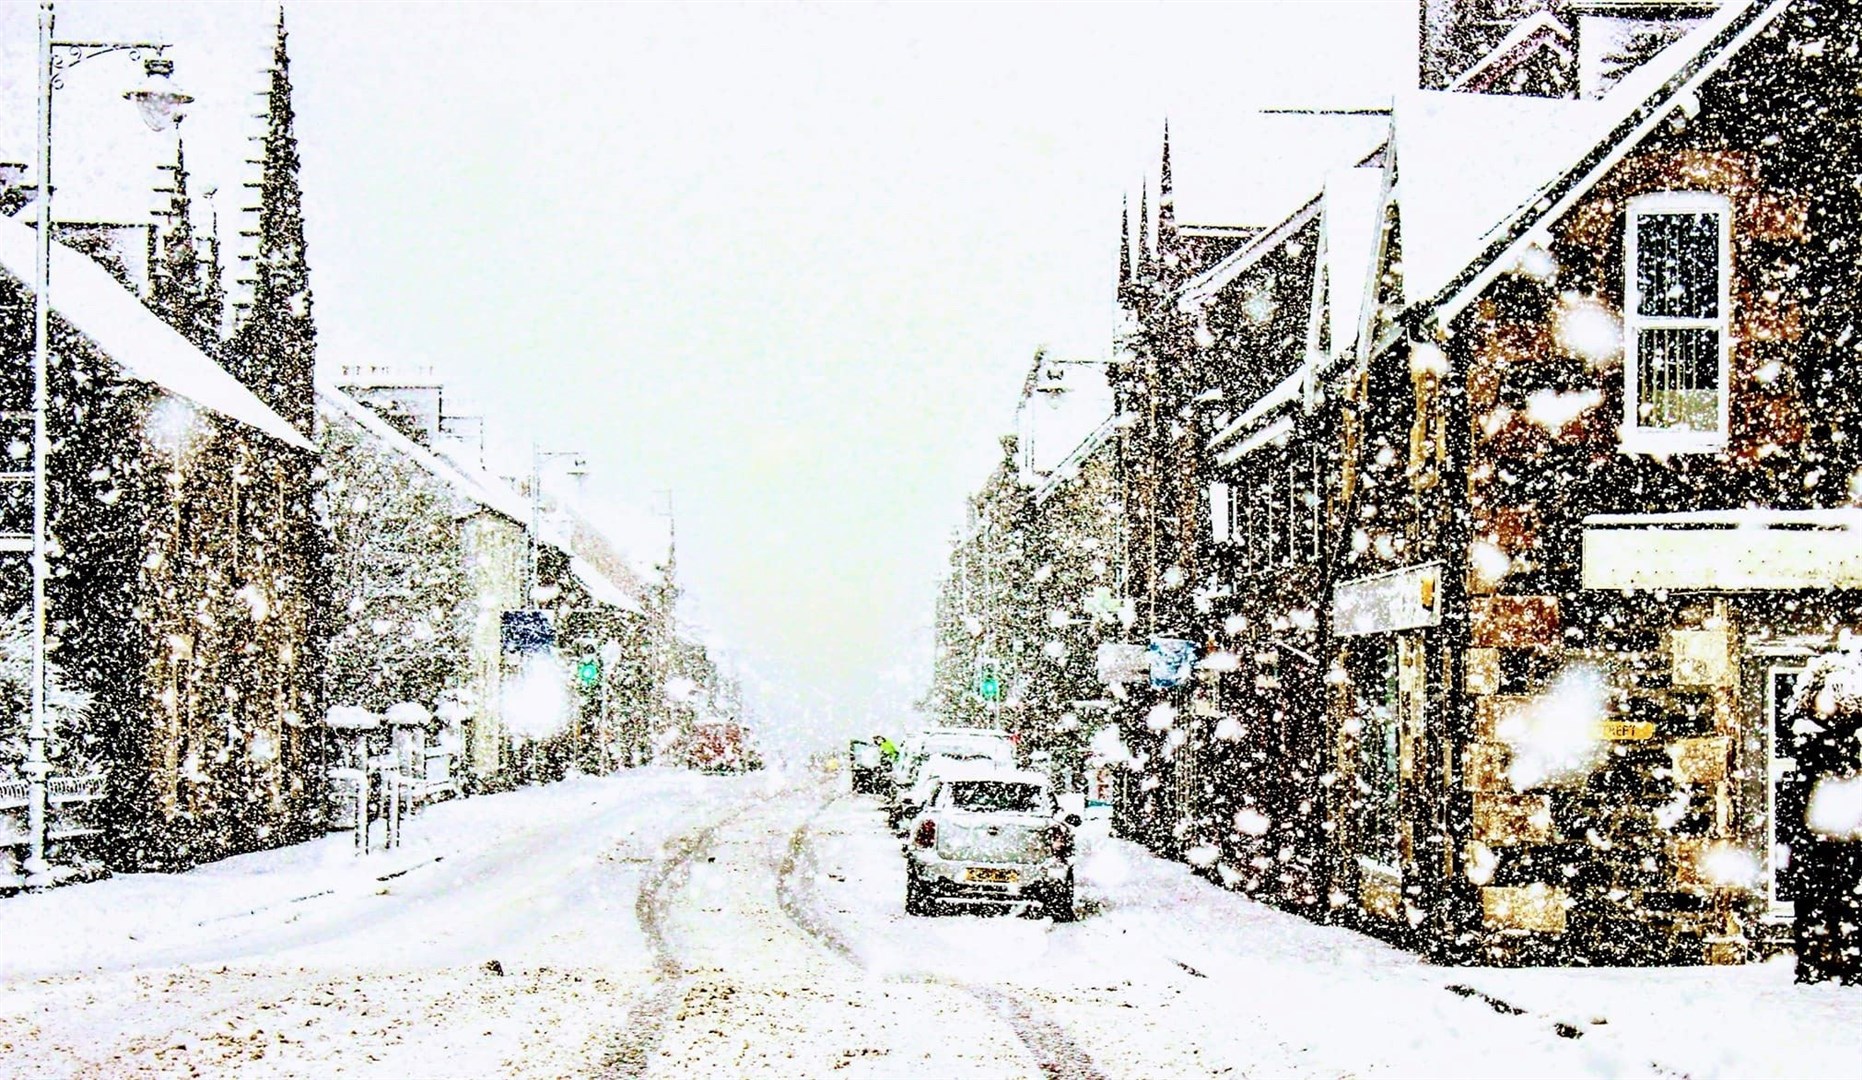 The strath is set to be hit with heavy snows before the cold spell is over (David Macleod)